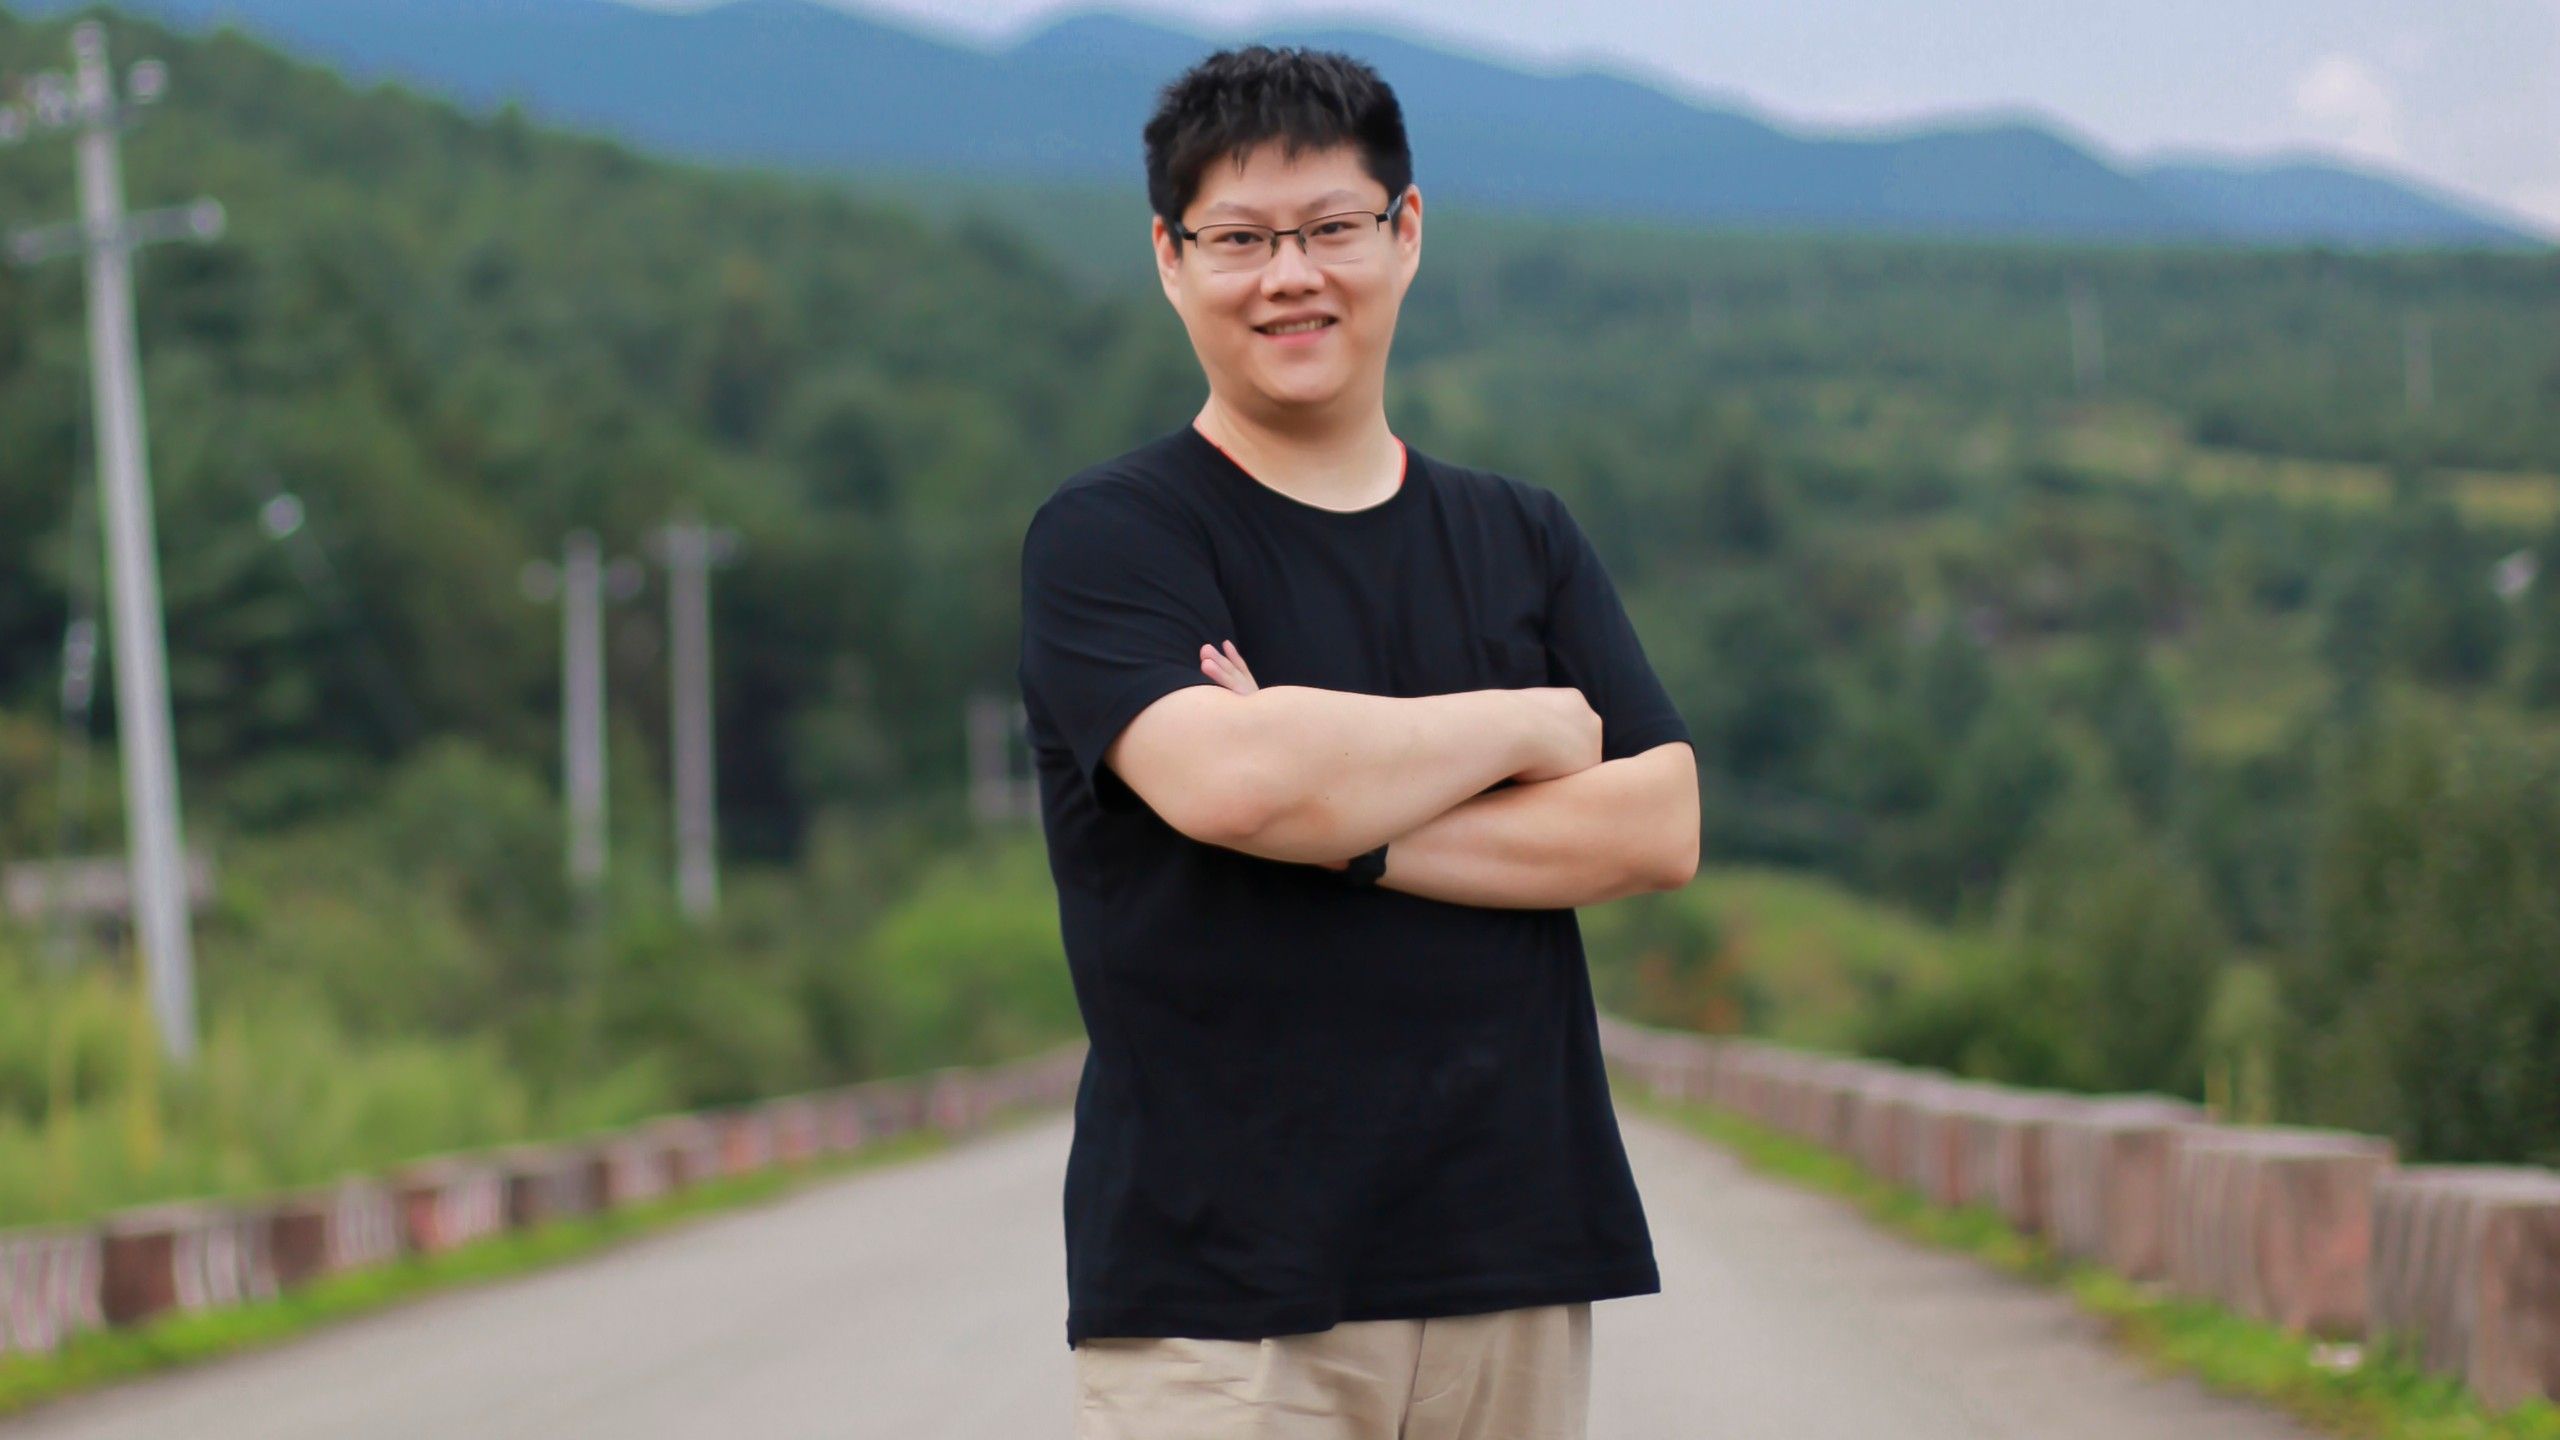 Pengcheng Zhao, Bachelor of Business (eCommerce) alumnus and Solutions Architect at Siemens China Ltd.